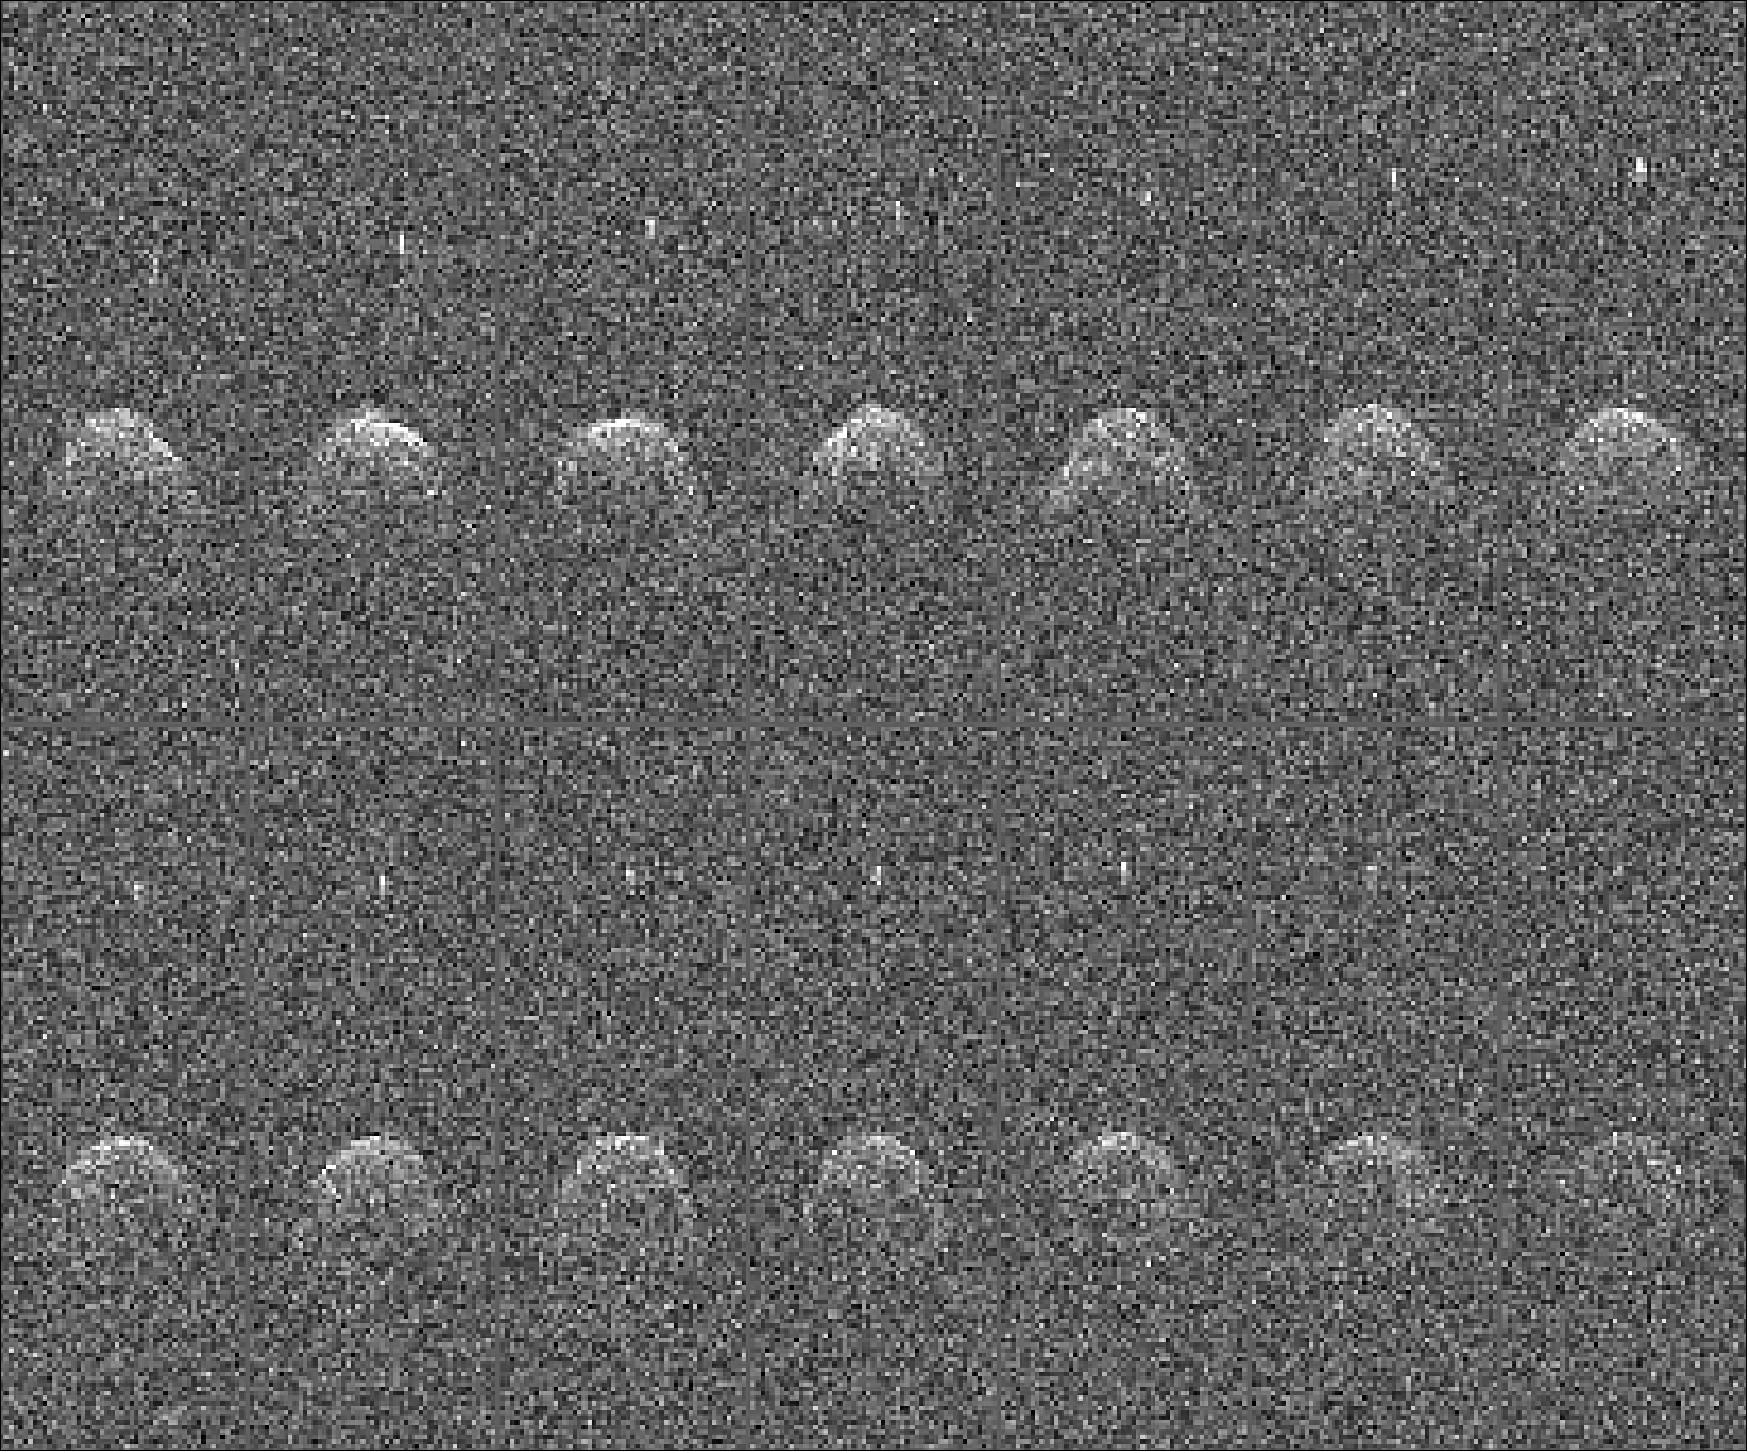 Figure 3: Fourteen sequential Arecibo radar images of the near-Earth asteroid (65803) Didymos and its moonlet, taken on 23, 24 and 26 November 2003. NASA’s planetary radar capabilities enable scientists to resolve shape, concavities, and possible large boulders on the surfaces of these small worlds. Photometric lightcurve data indicated that Didymos is a binary system, and radar imagery distinctly shows the secondary body (image credit: NASA) 10)